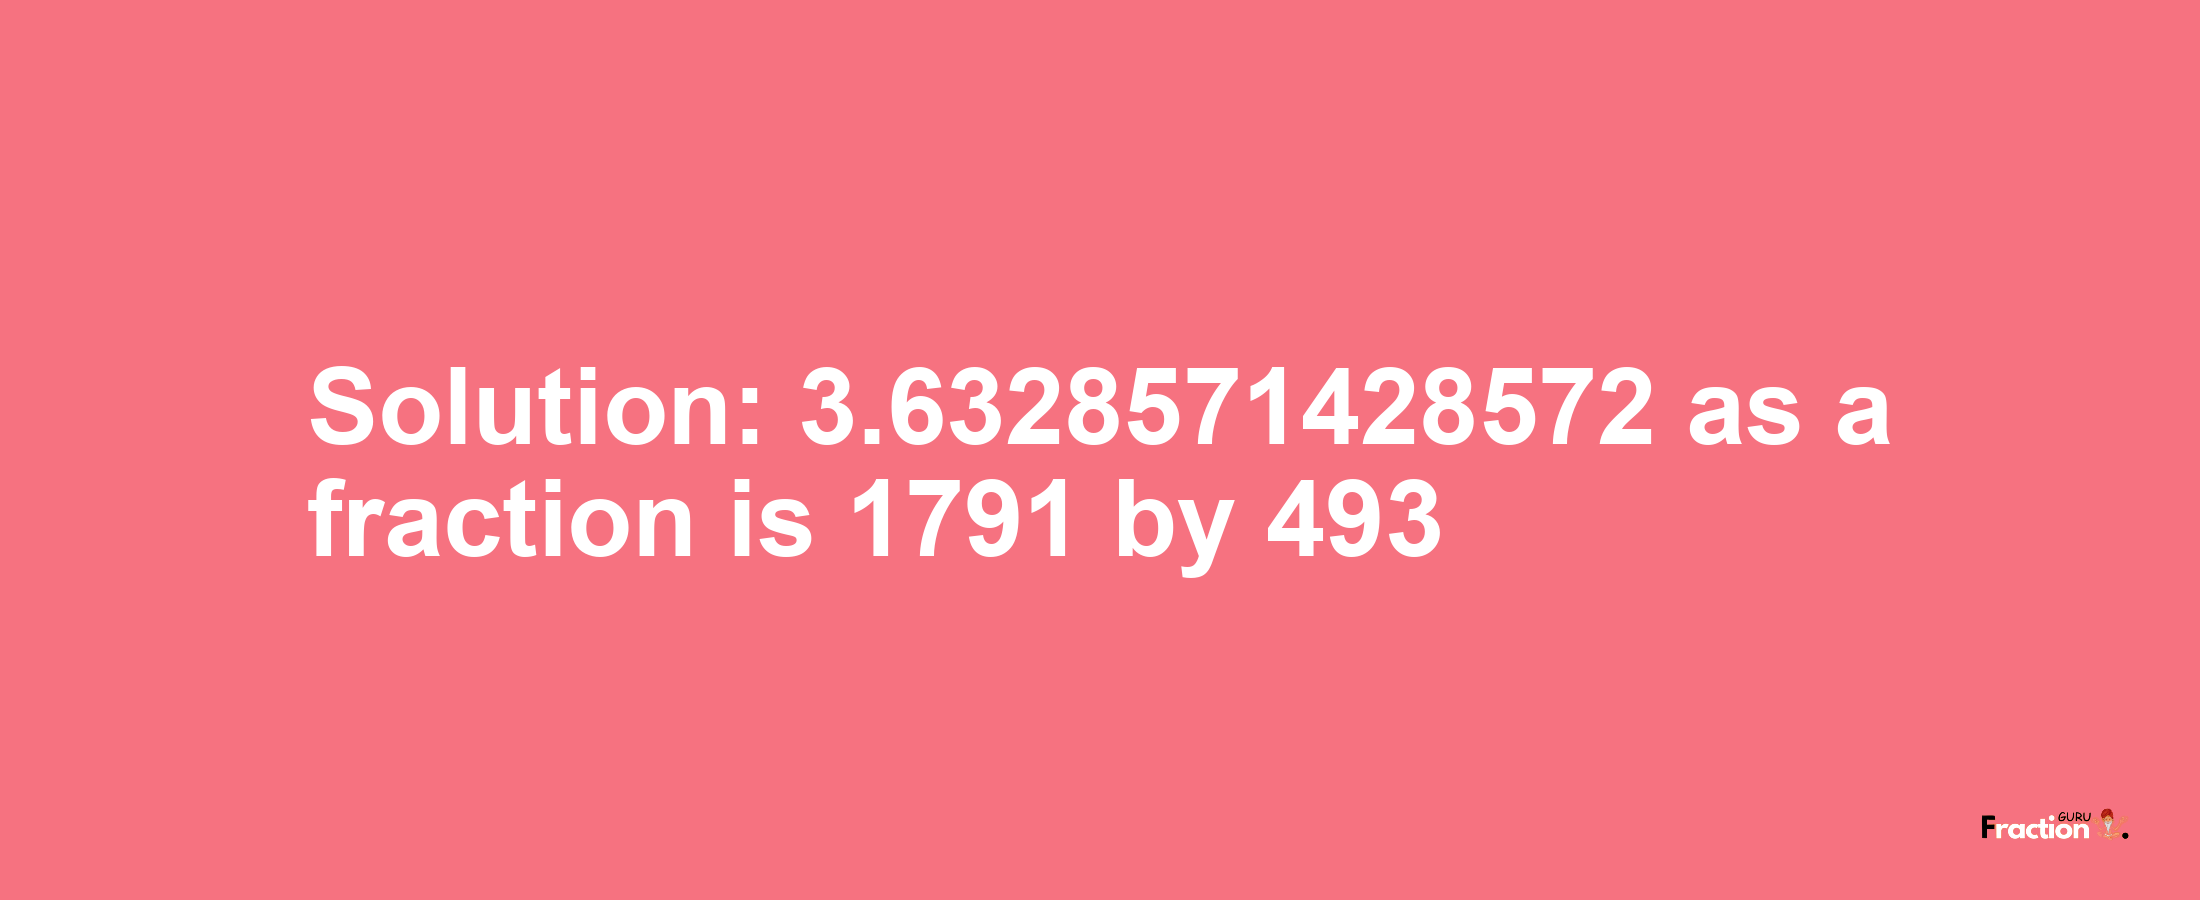 Solution:3.6328571428572 as a fraction is 1791/493